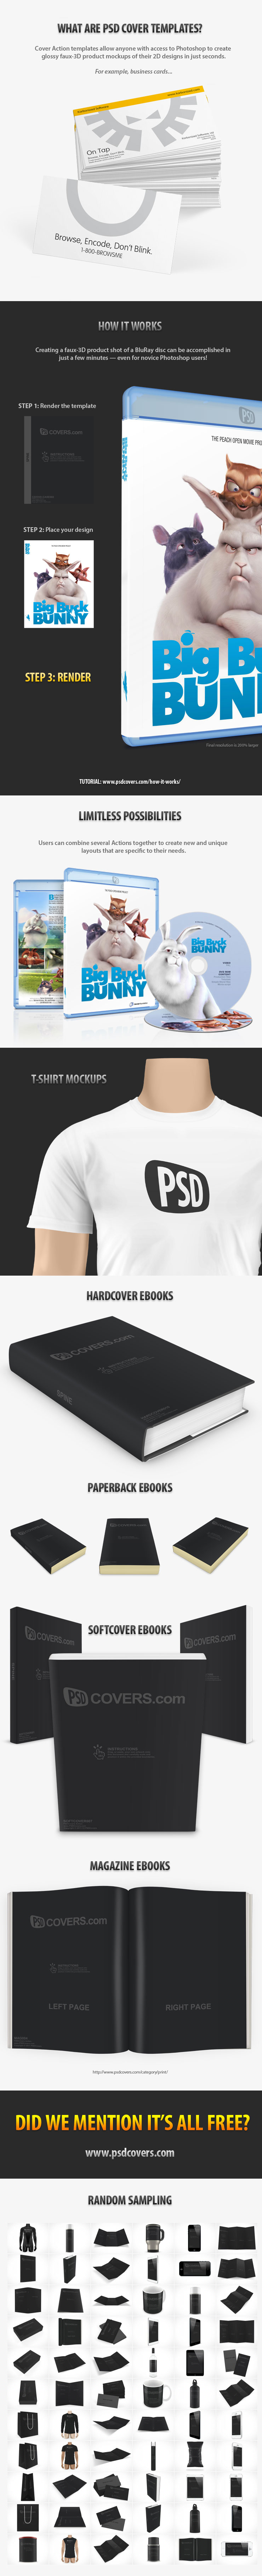 PSD Mock-up Templates Free Downloads